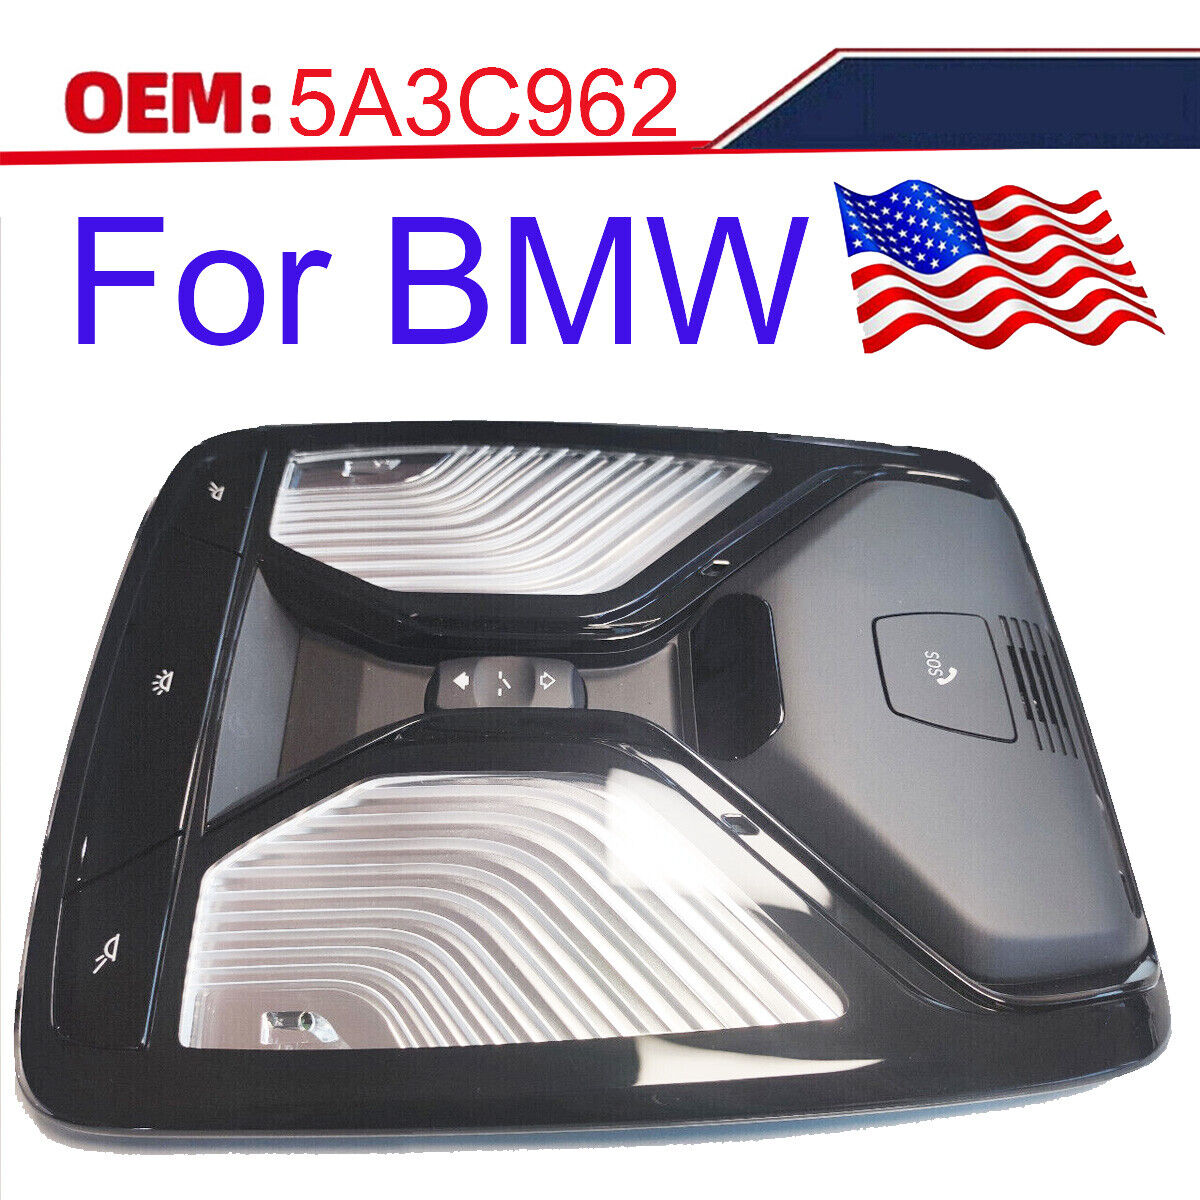 NEW FOR BMW 5 6 Series X3 X4 interior light function center Roof OEM 5A3C962 US